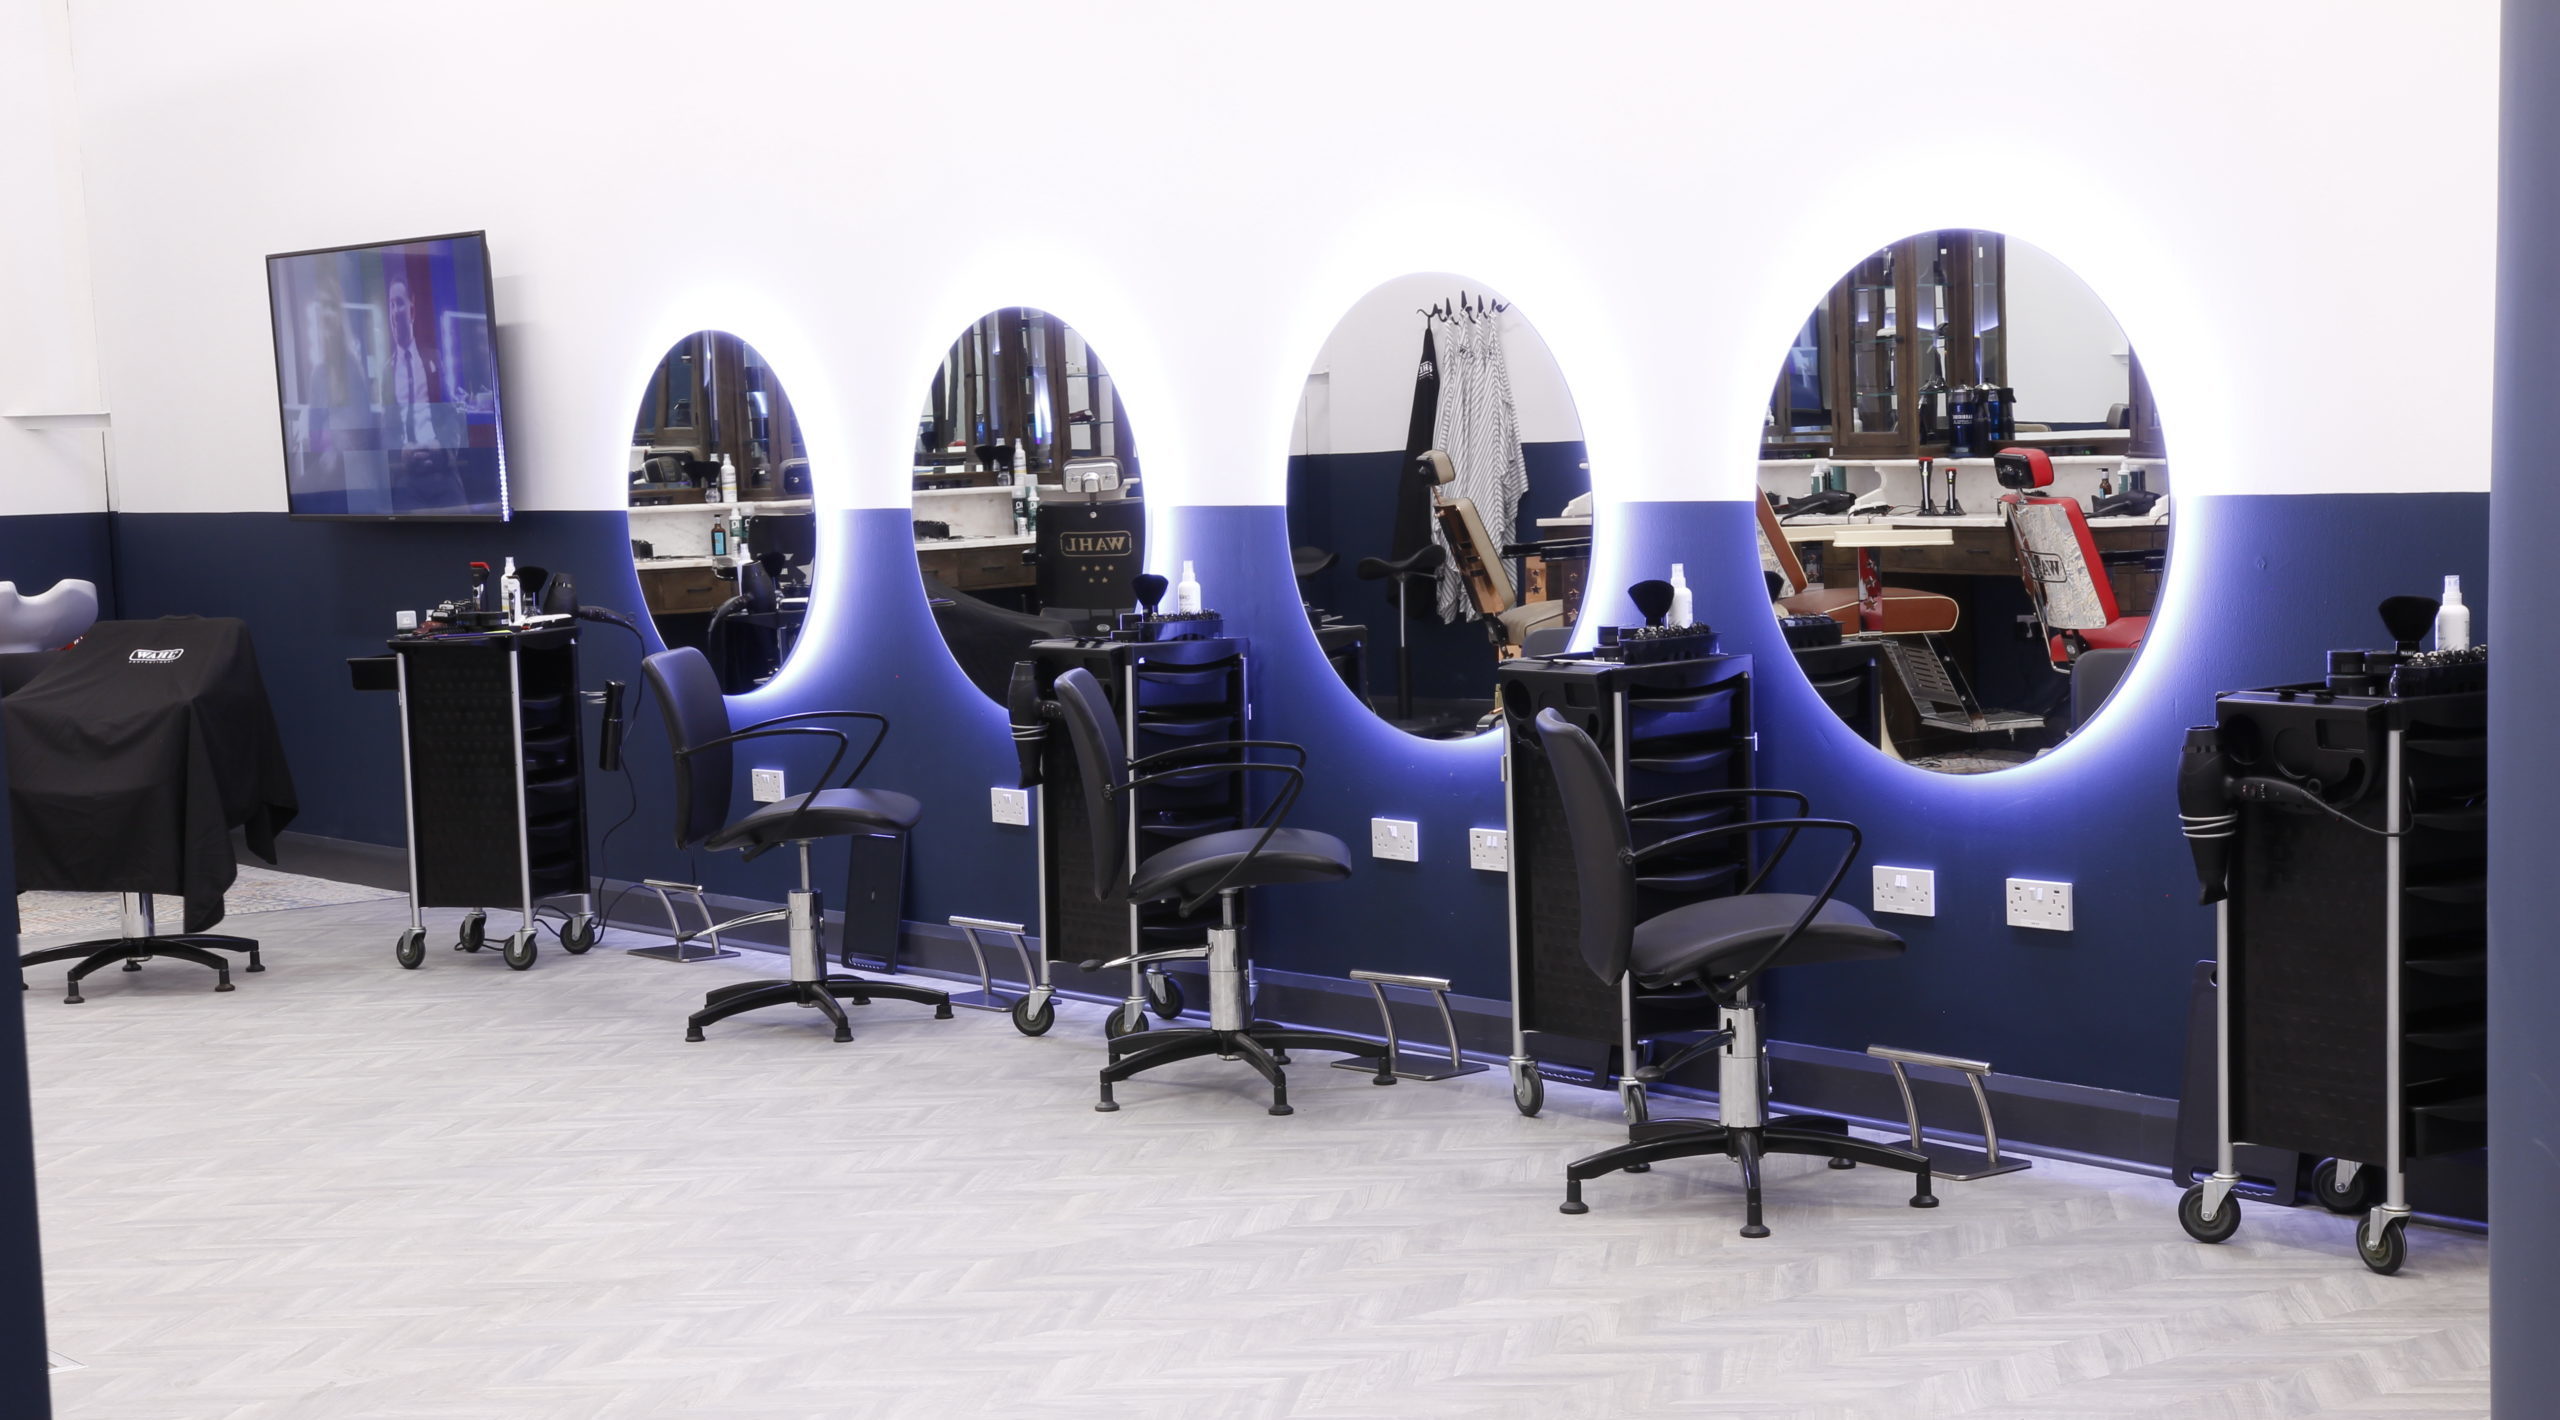 barbers chairs in front of mirrors